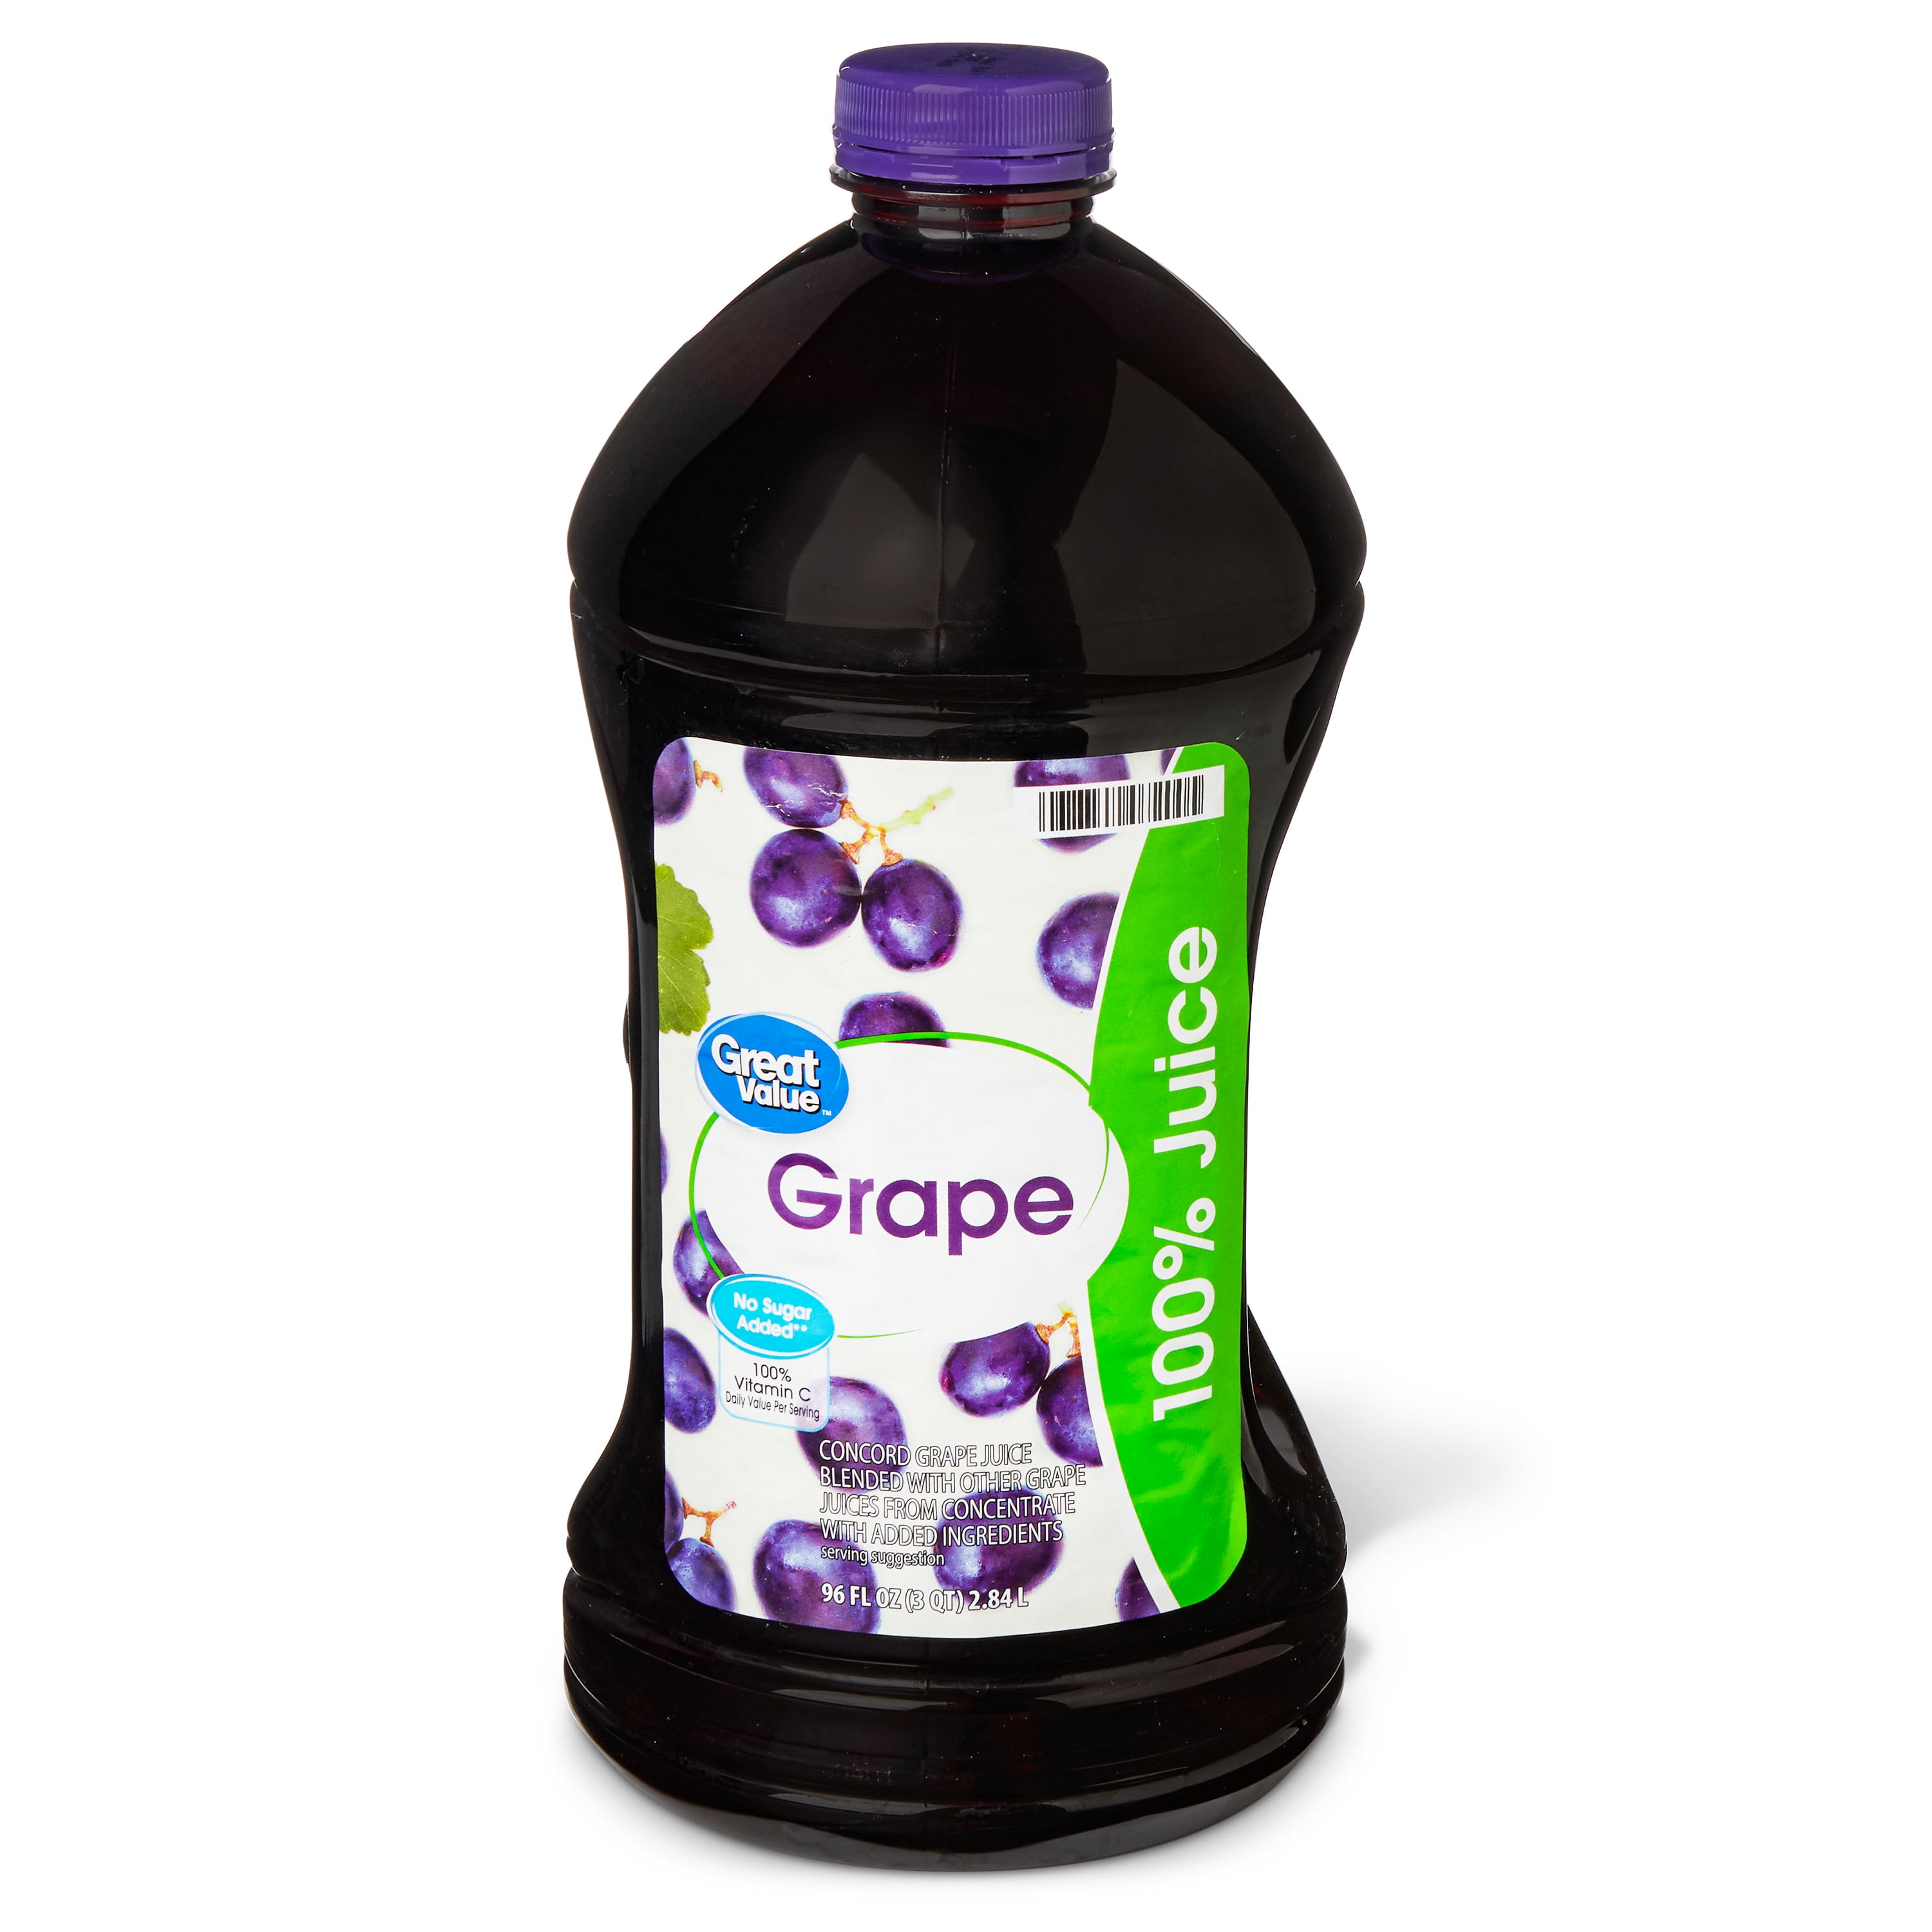 Great Value Grape 100 Juice 96 Fl Oz Home And Garden